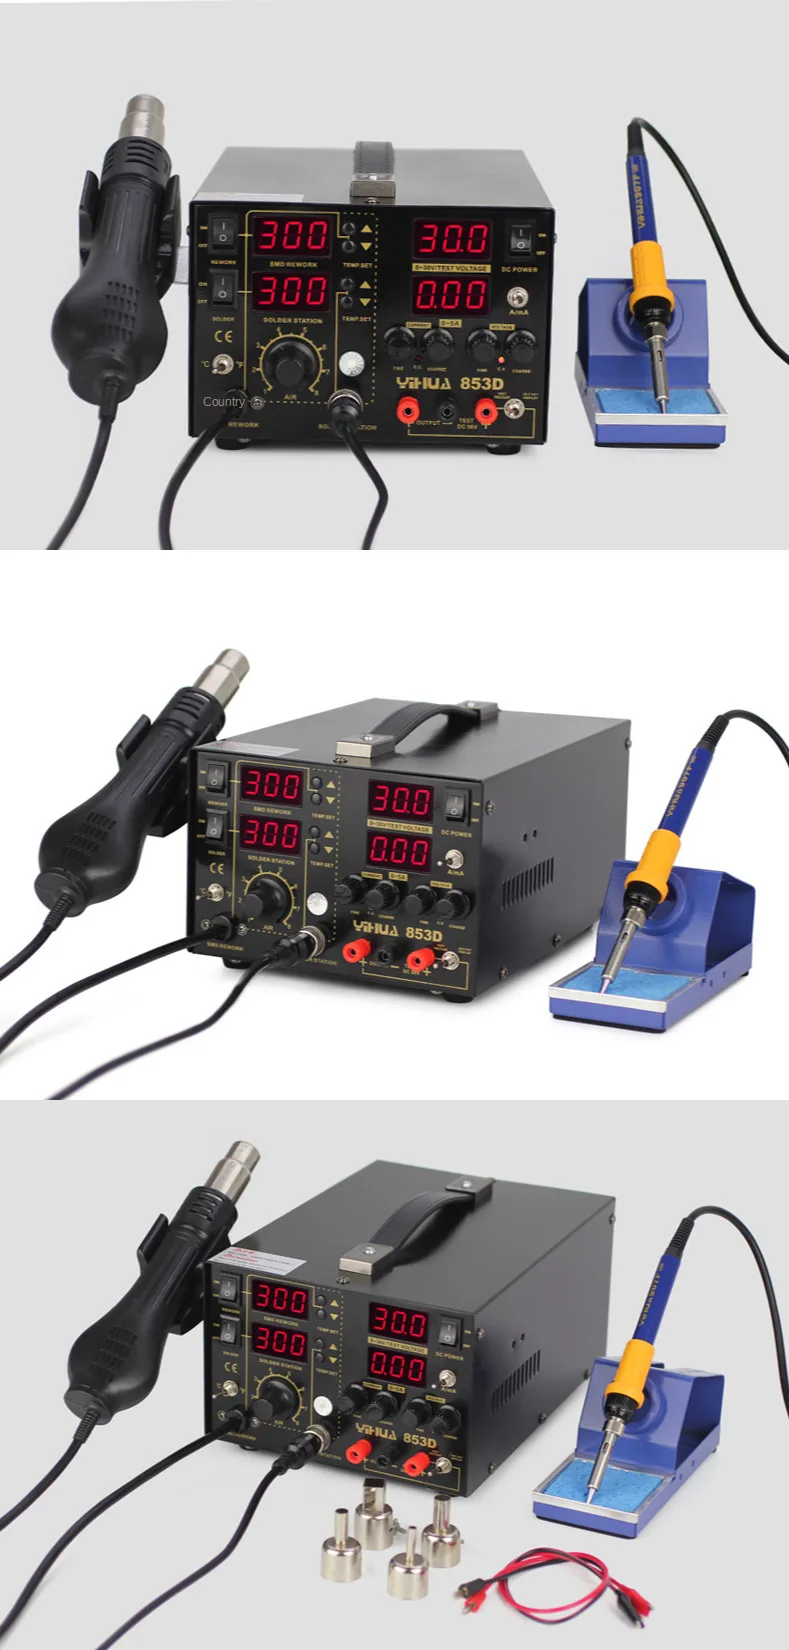 YIHUA 853D 5A Hot Air Gun Rework Station 5A DC Power Supply Functions Rework Soldering Iron Station MACHINE Free Shipping 3 in 1